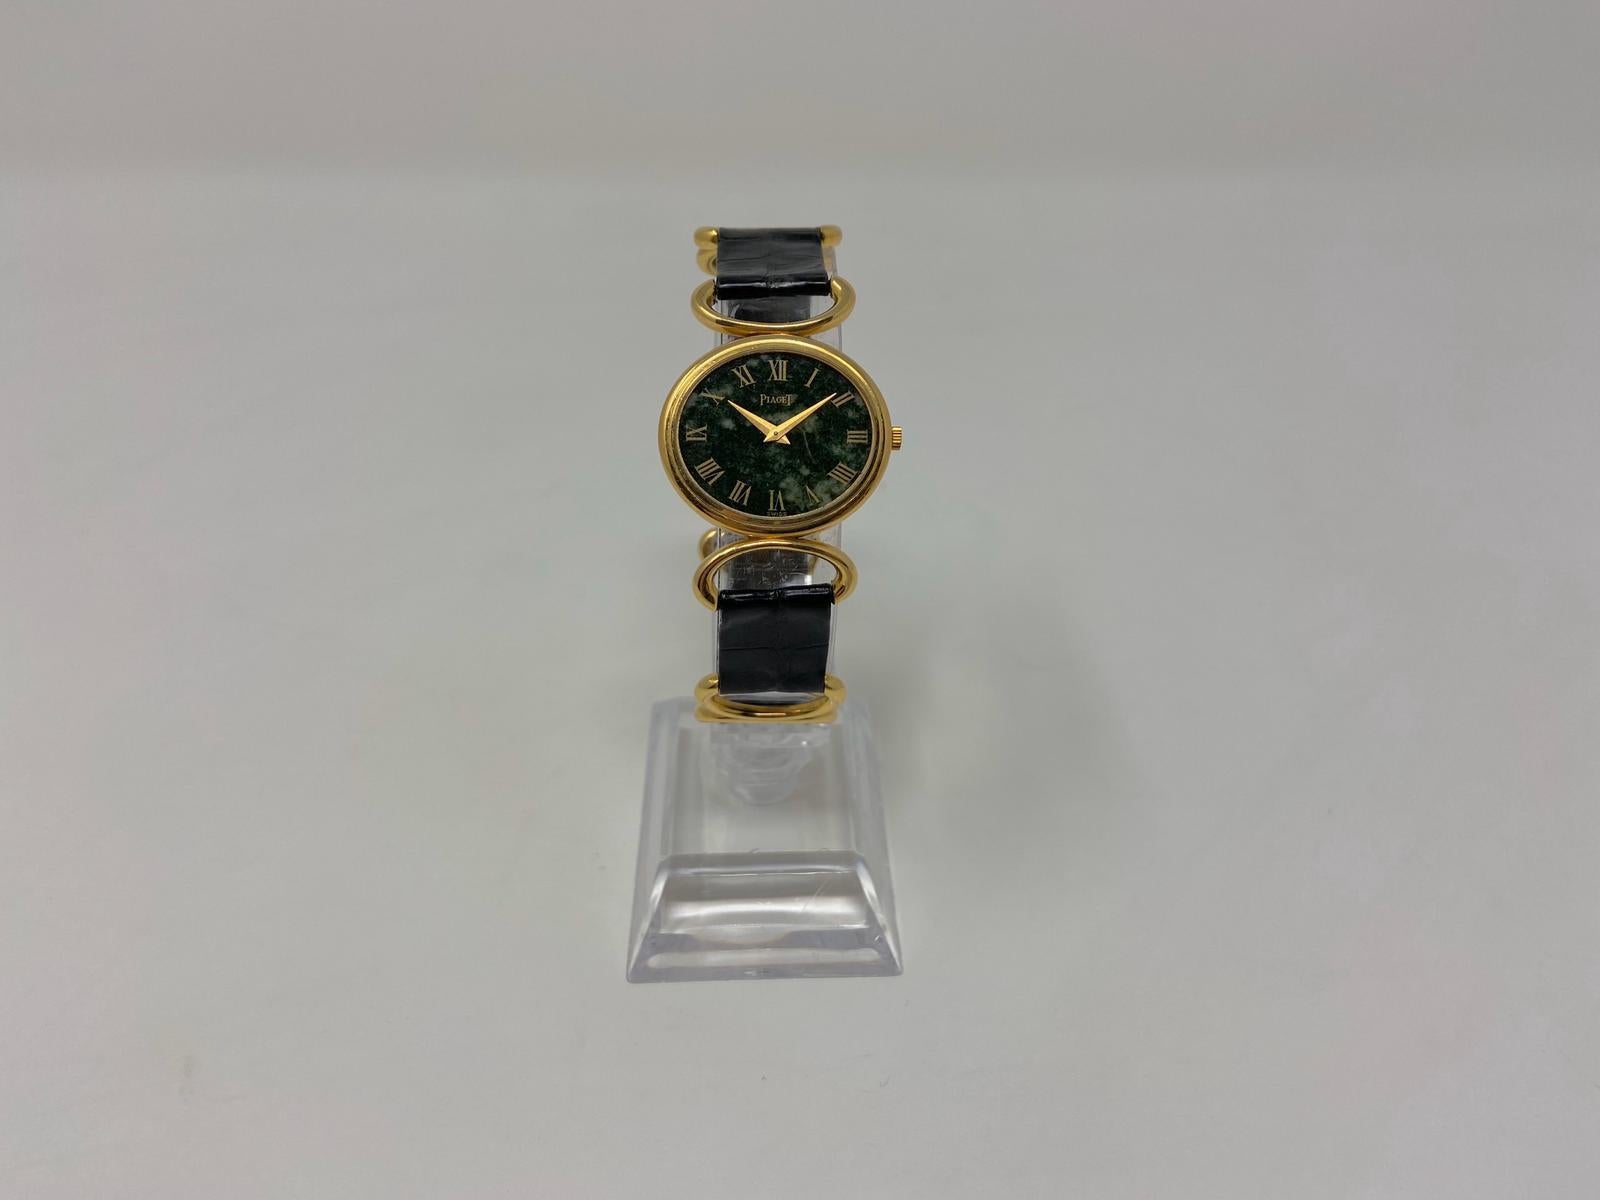 1970s Piaget lady gold watch, with the face watch in Jade, with original watch strap in alligator signed by Piaget.
In excellent condition, it works perfectly.